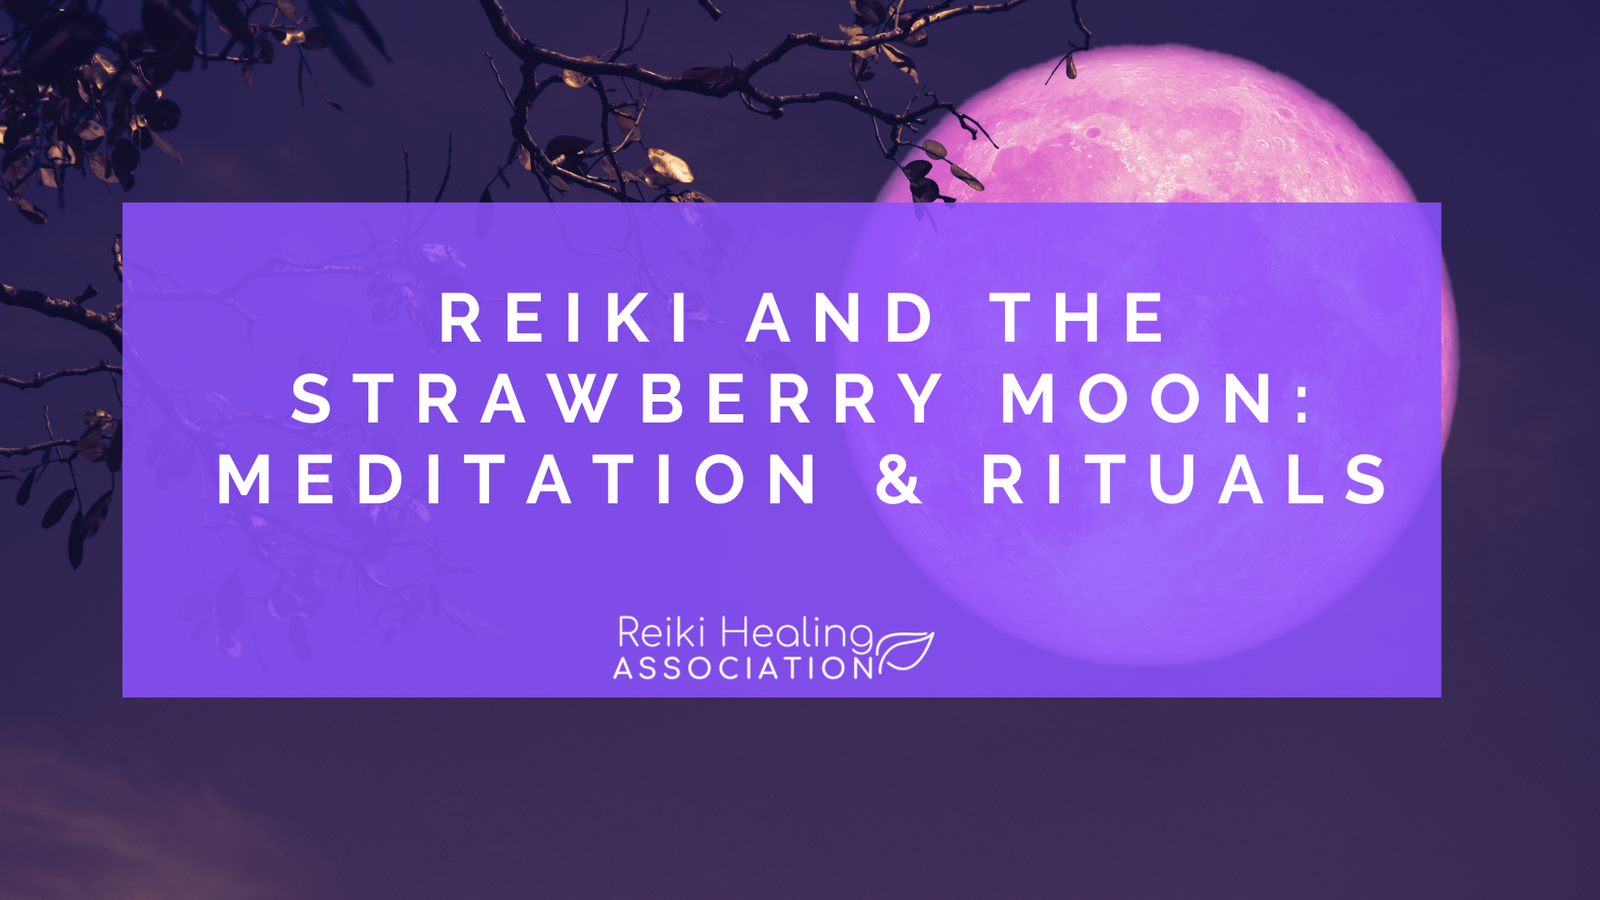 Reiki and the Strawberry Moon